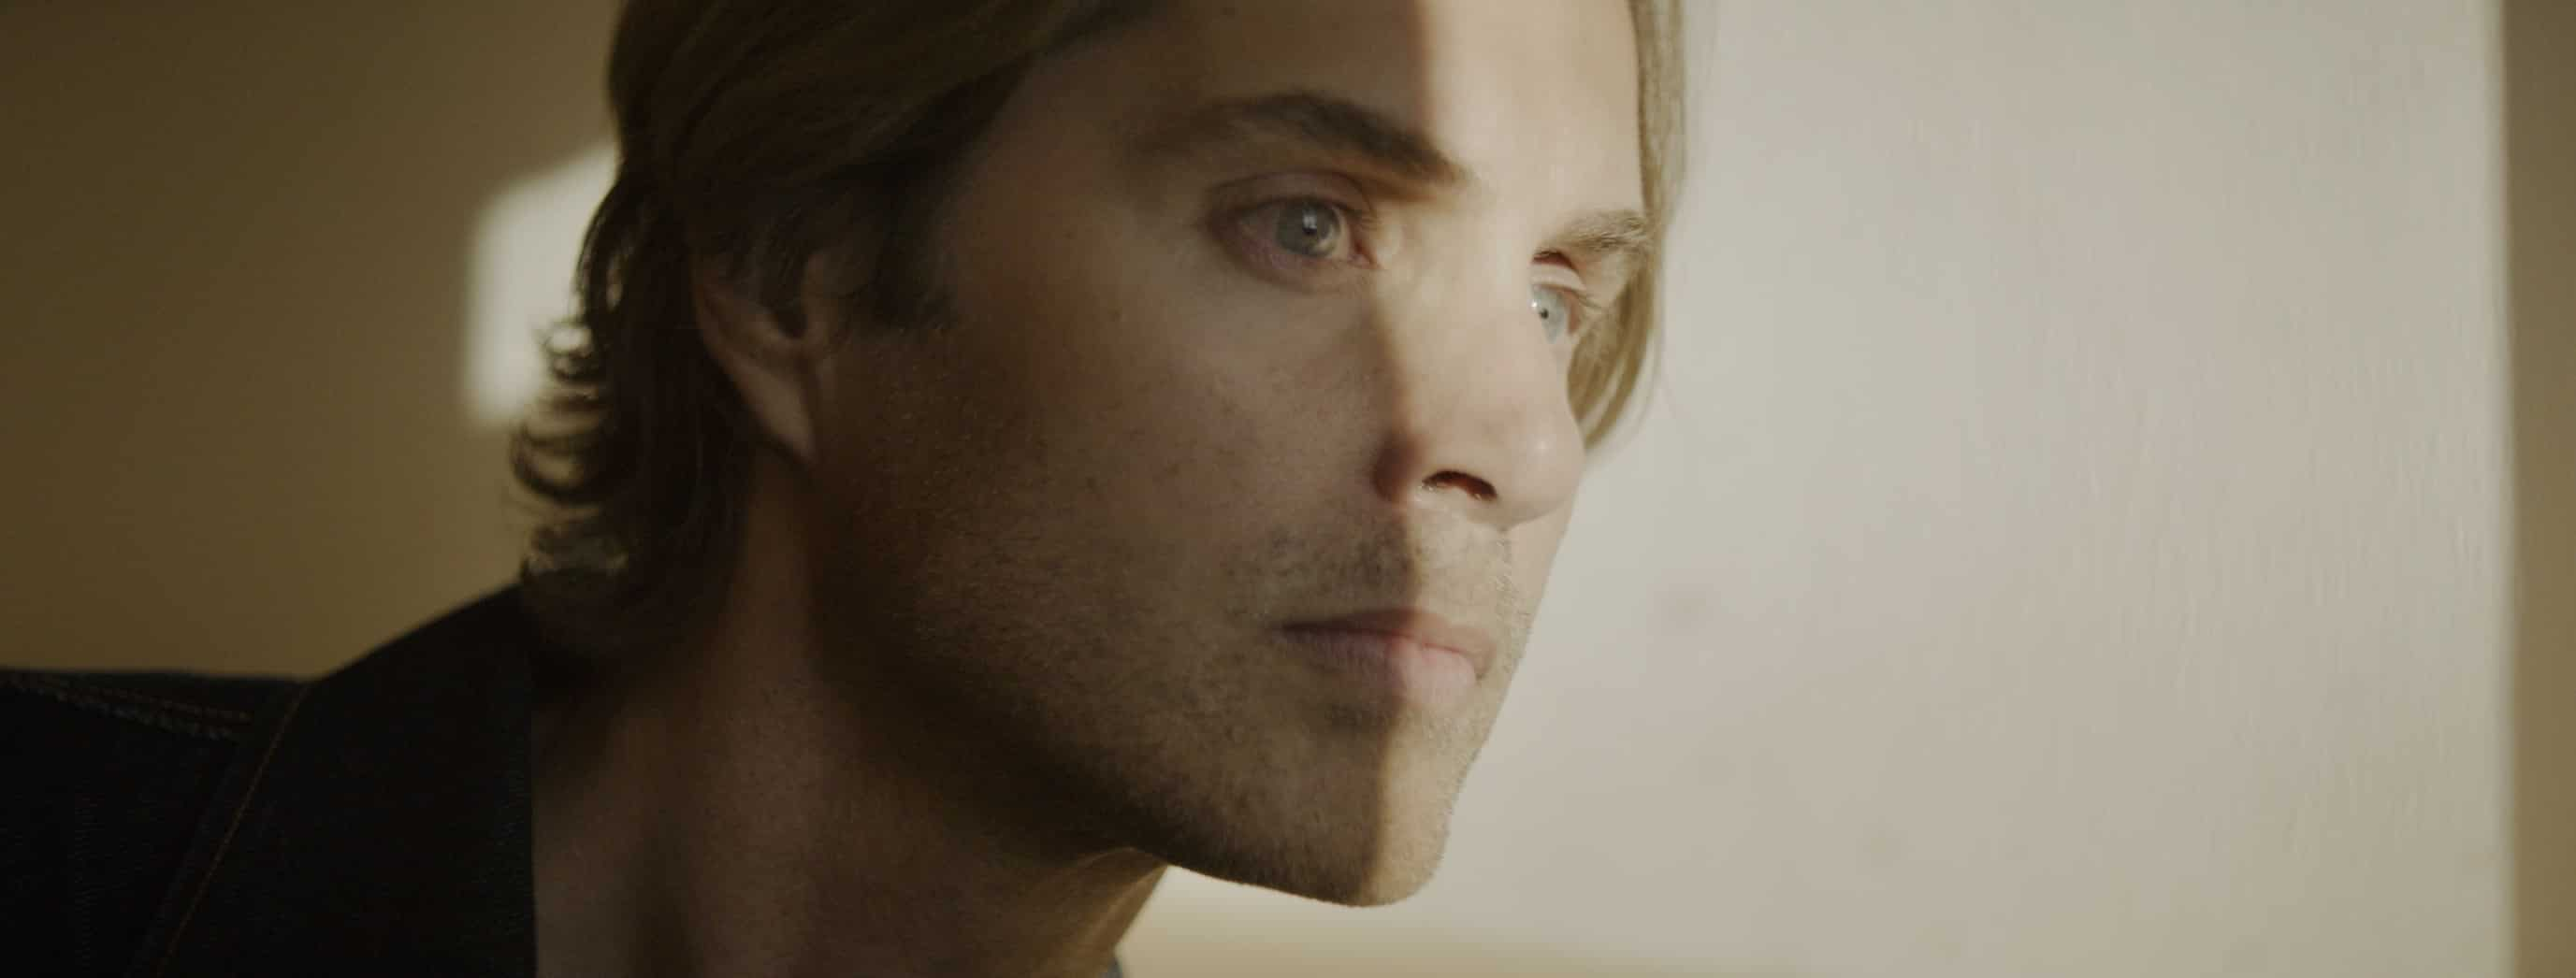 Miracle Valley and The Room Star Greg Sestero Talks Cults, The Worst Movie of All Time, and Aussie Audiences in This Interview